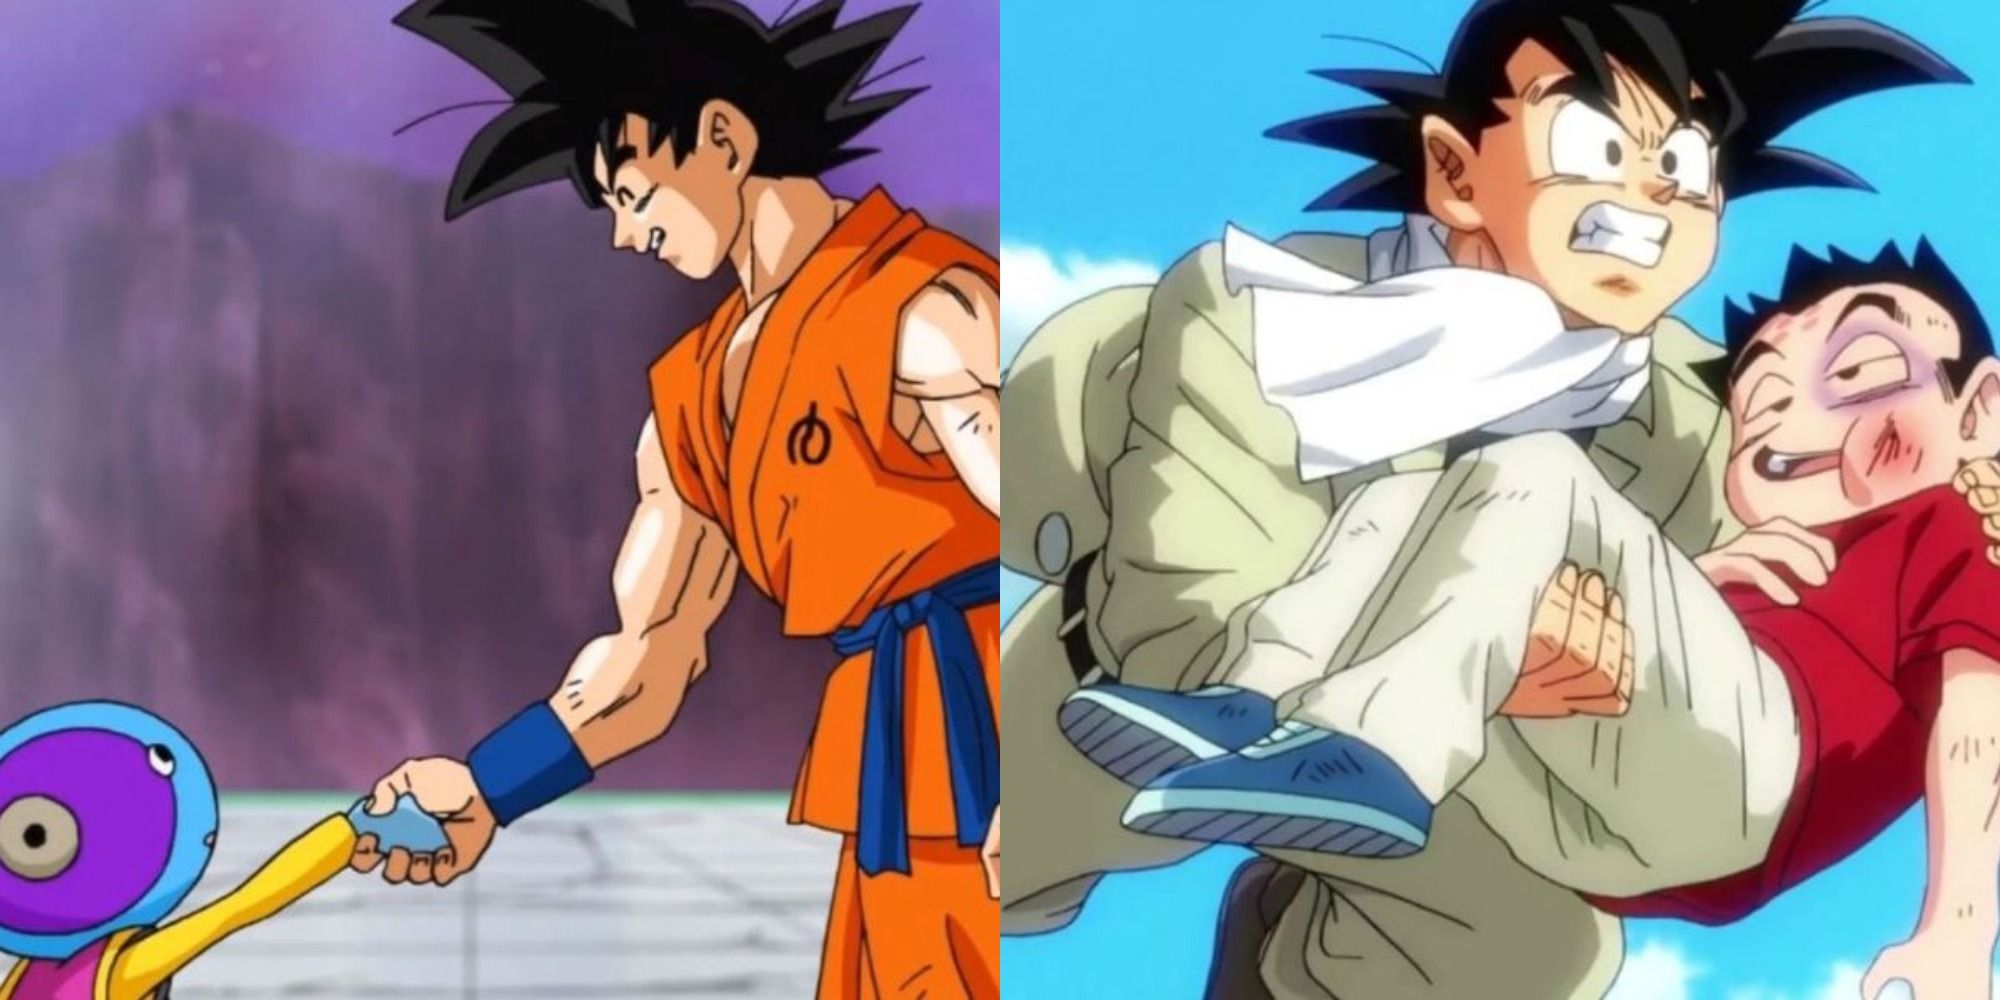 Split image showing Goku shaking Zeno's hand, and him carrying a bruised Krillin